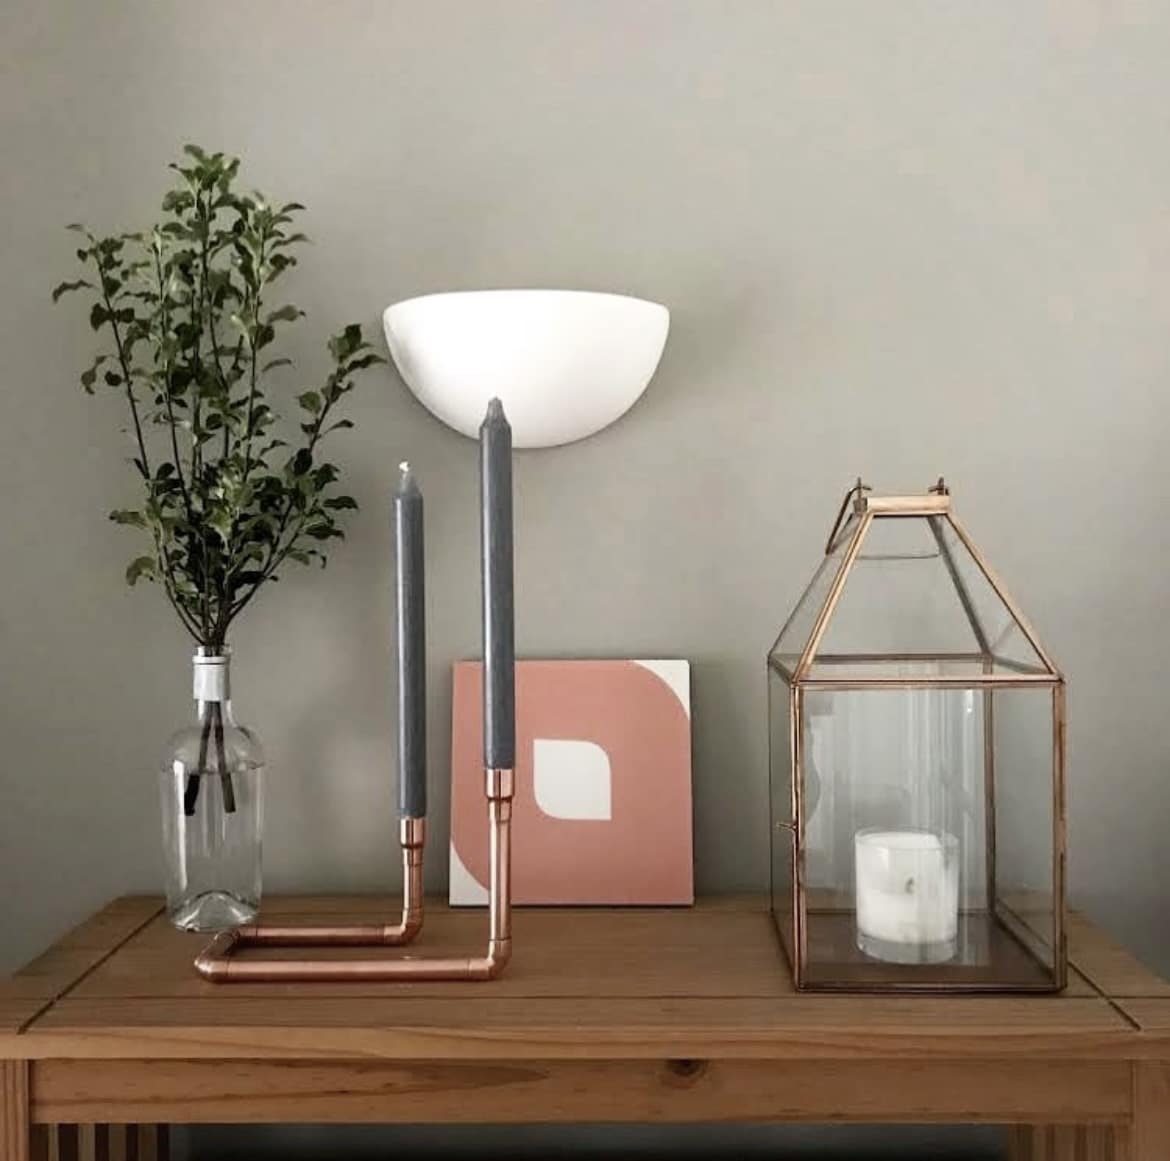 copper candlestick holders and lantern sat on a wooden console table against a green wall